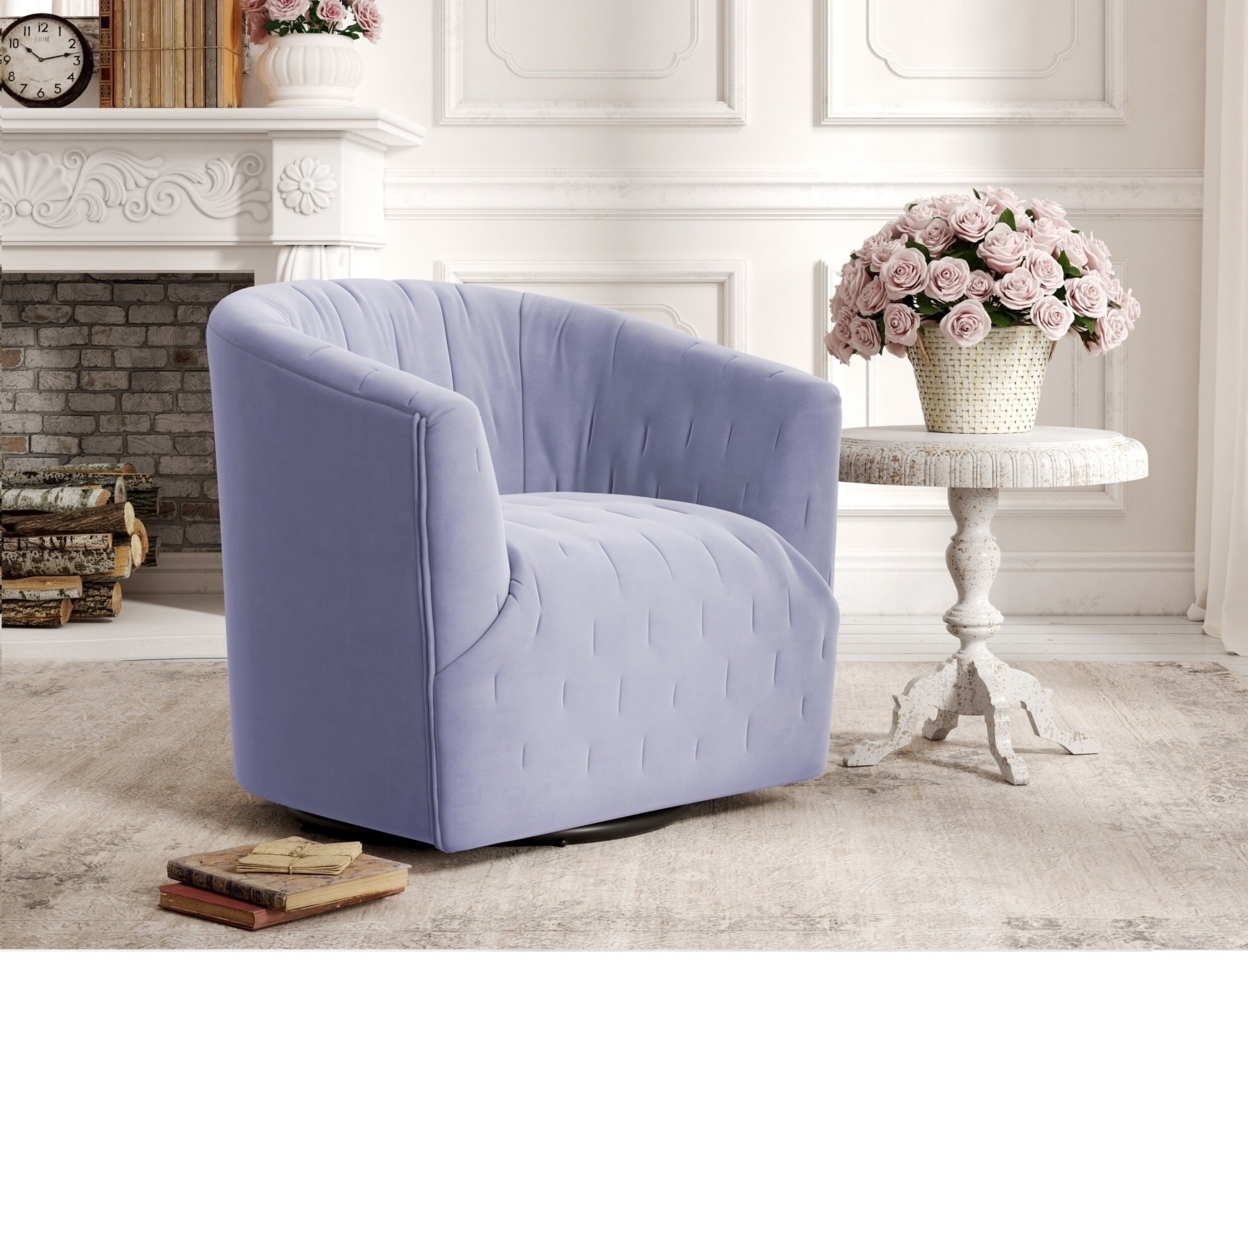 Kaitlin Accent Chair-Upholstered-Tufted-Barrel - Lilac